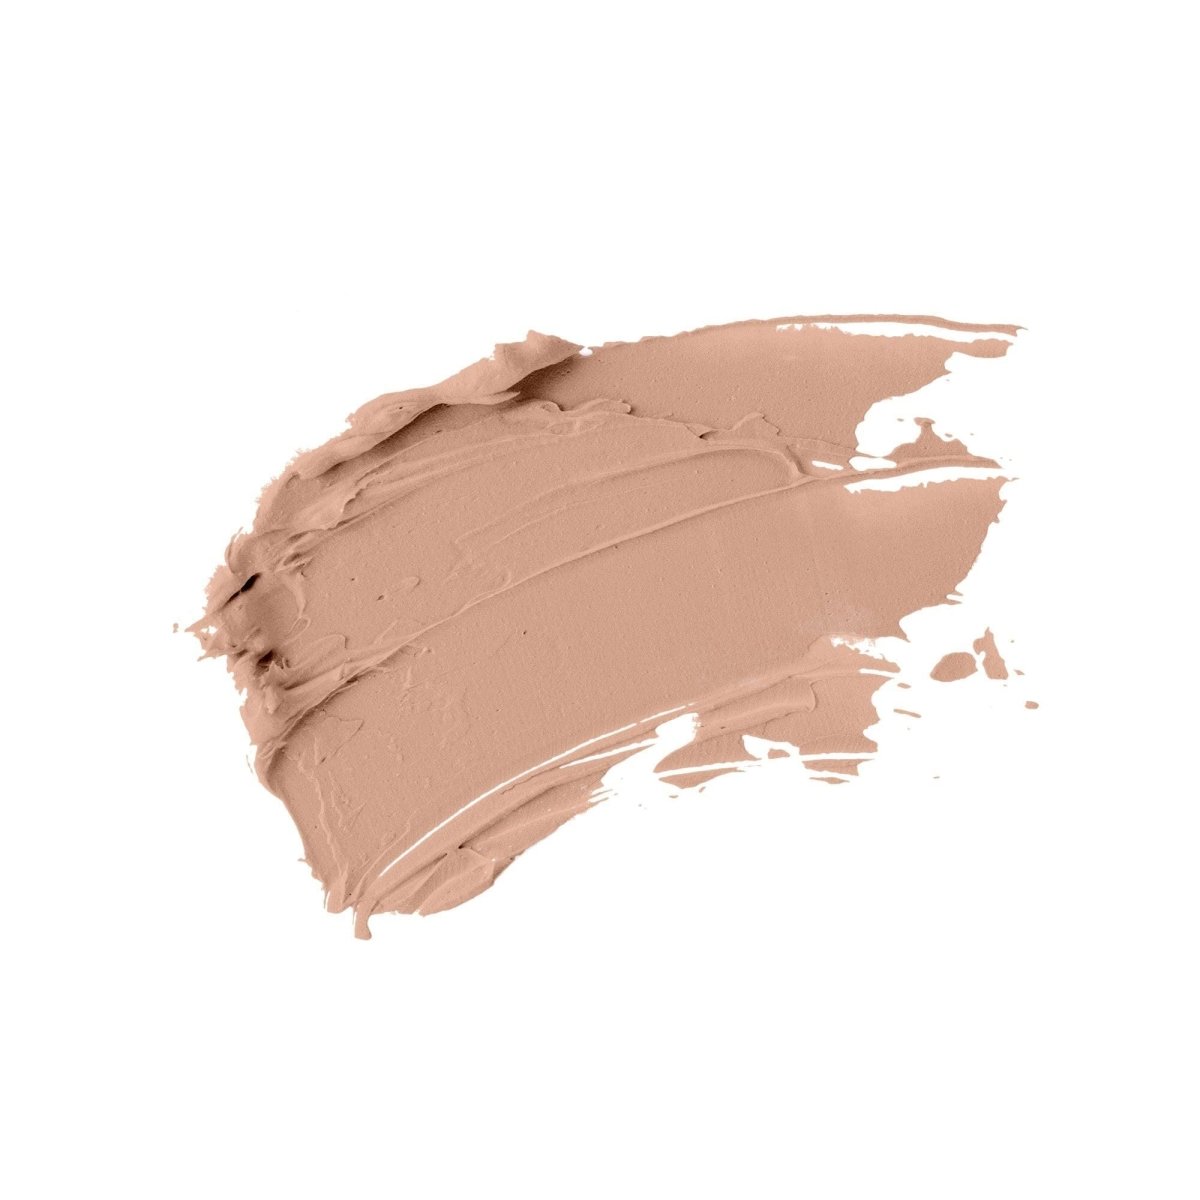 swatch of a natural, non toxic extra light porcelain liquid foundation on a white background